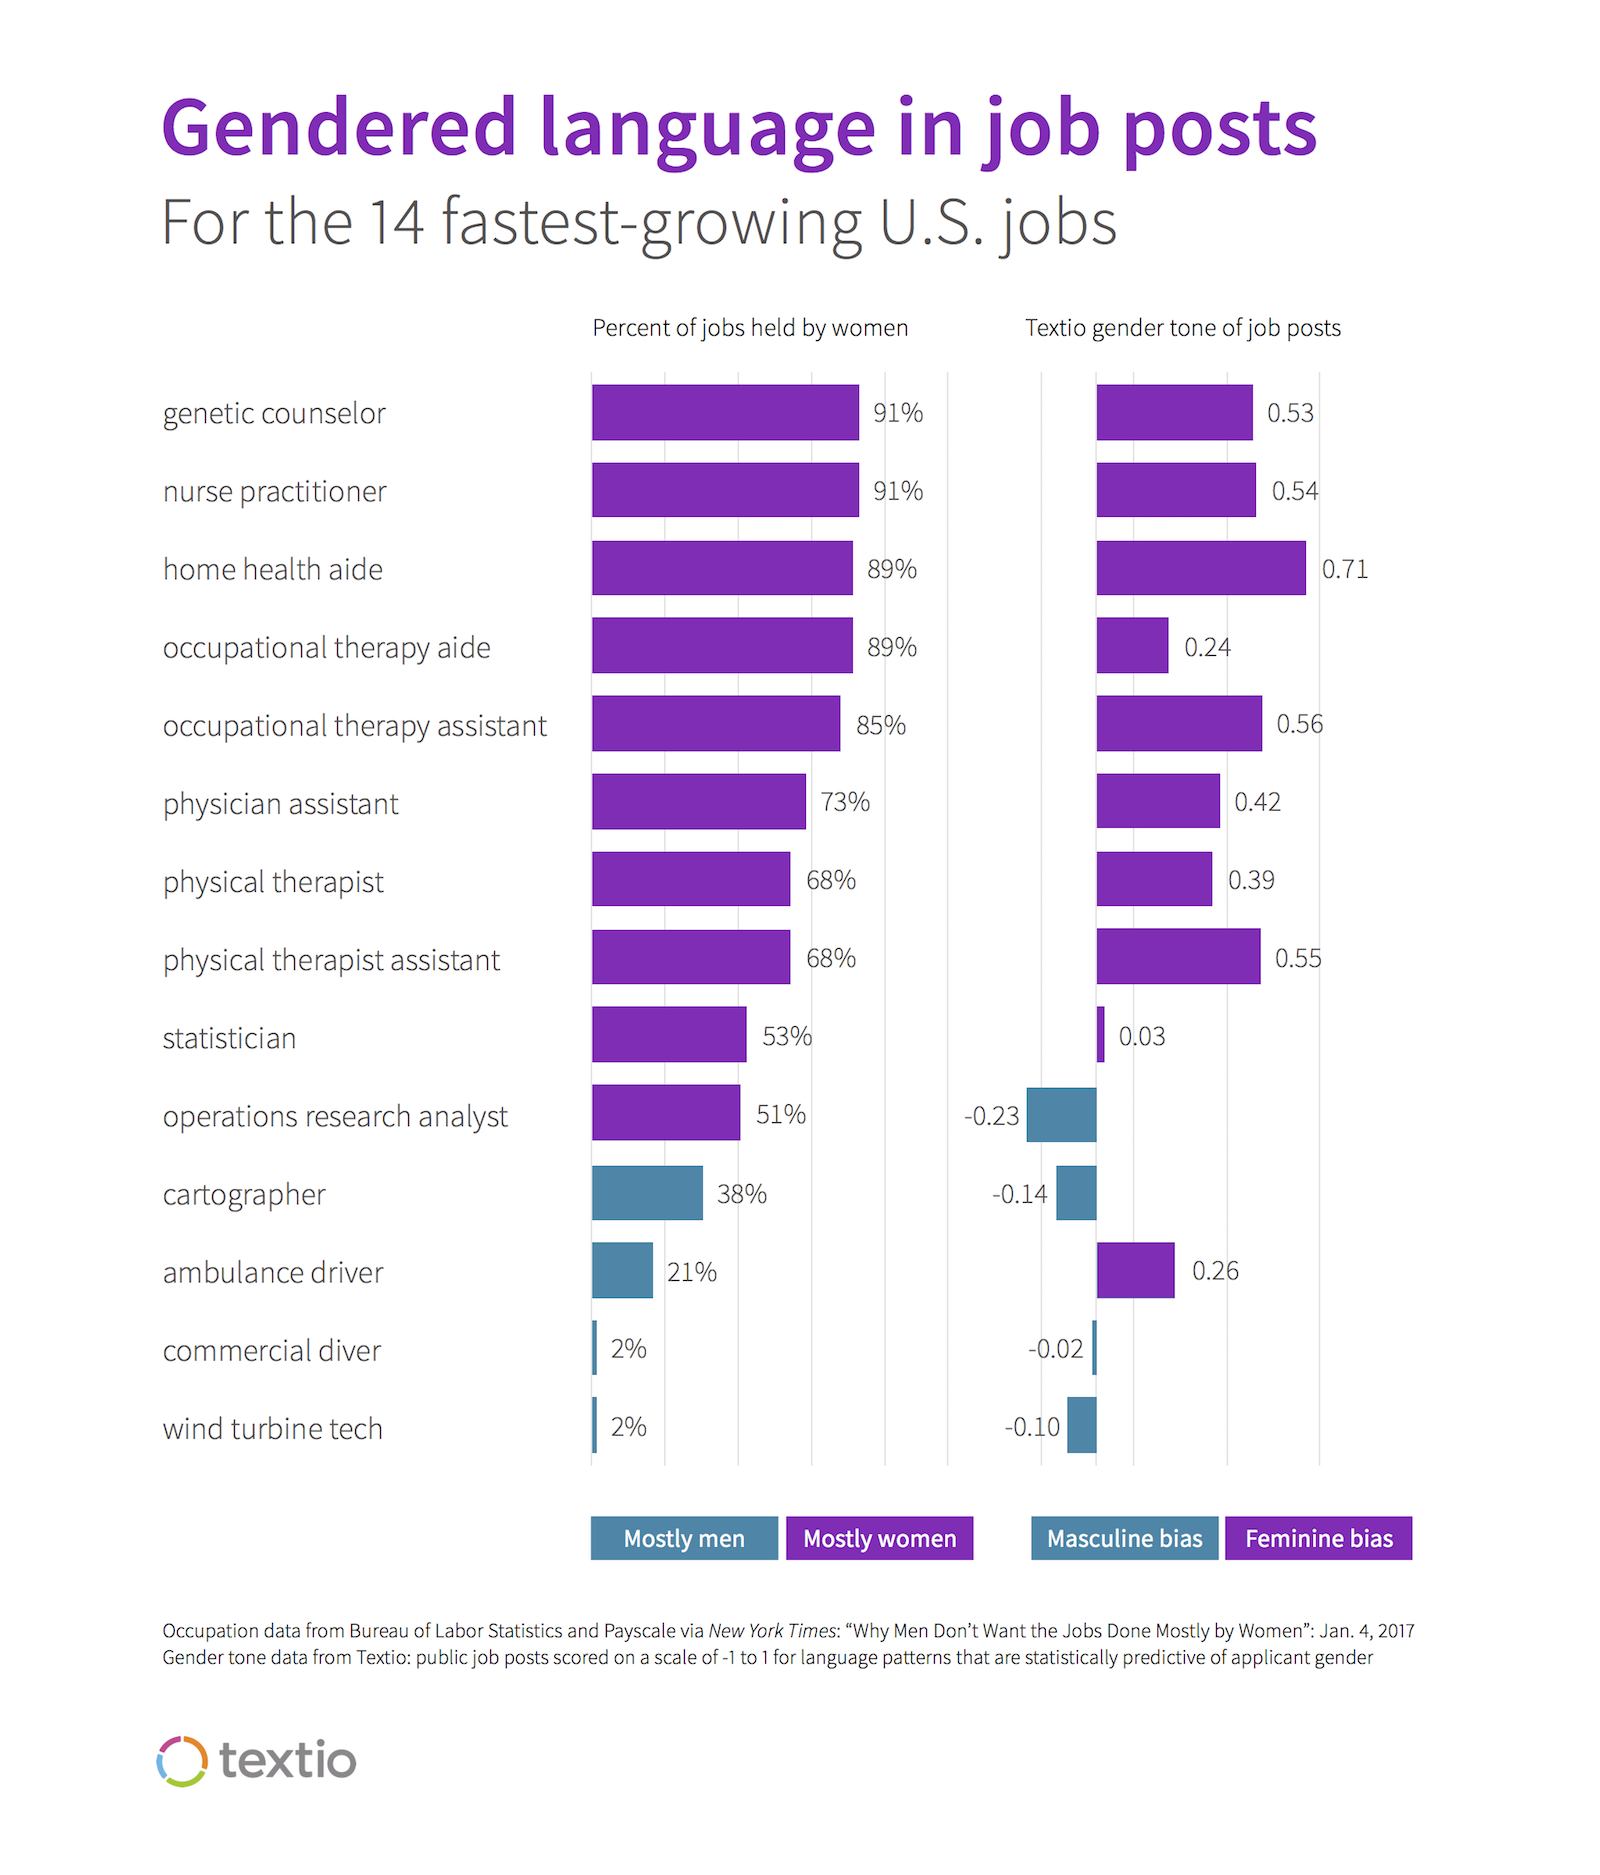 Graph showing gendered language in job posts for the fastest-growing US jobs